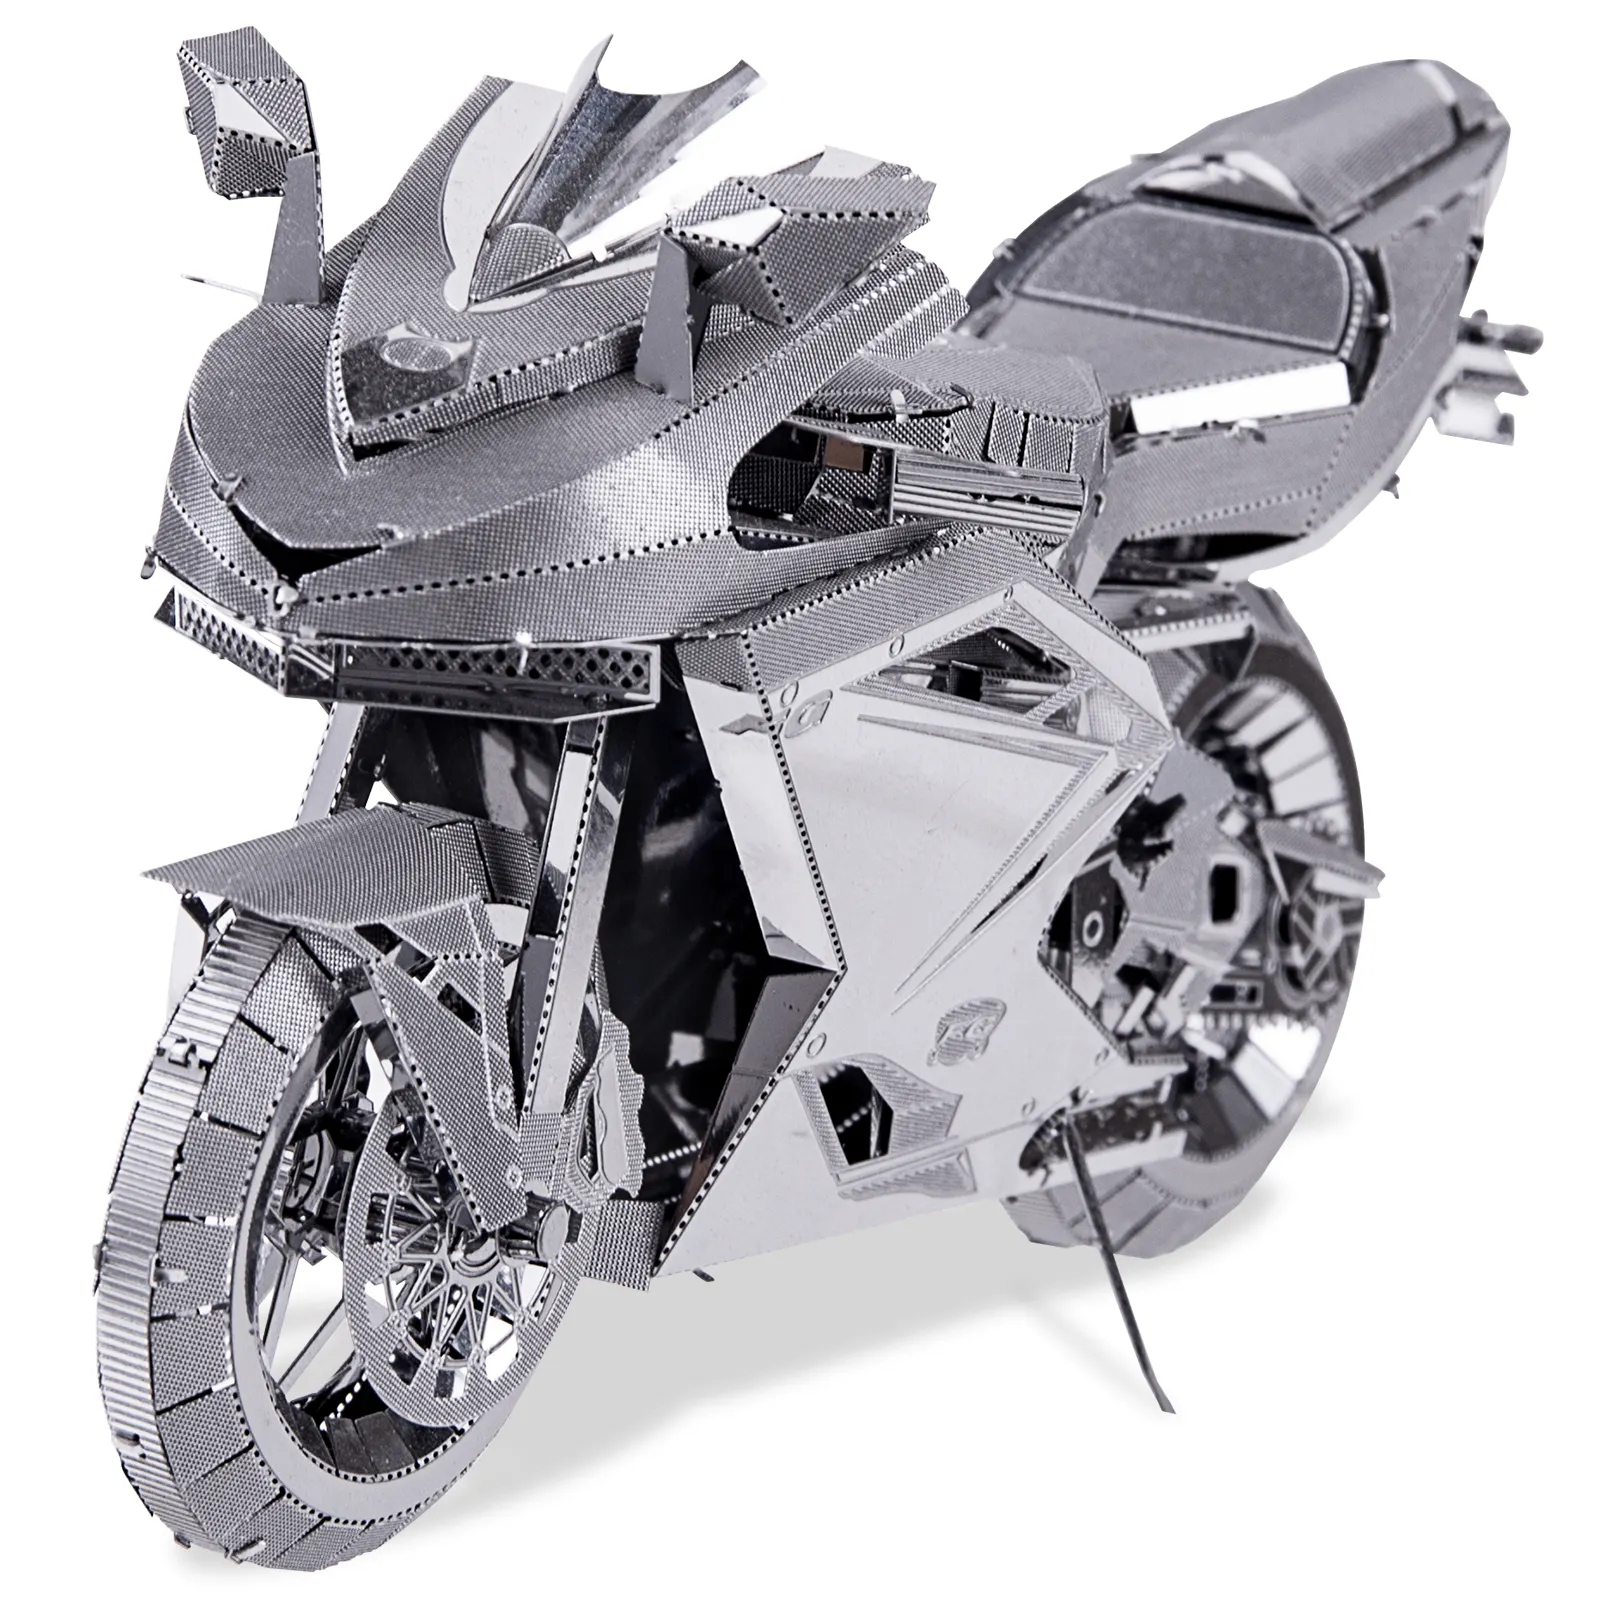 Piececool 3D Metal Puzzles Brain Teaser Crafts 3D Motorcycle Model Kits for Adults and Teen Students Men